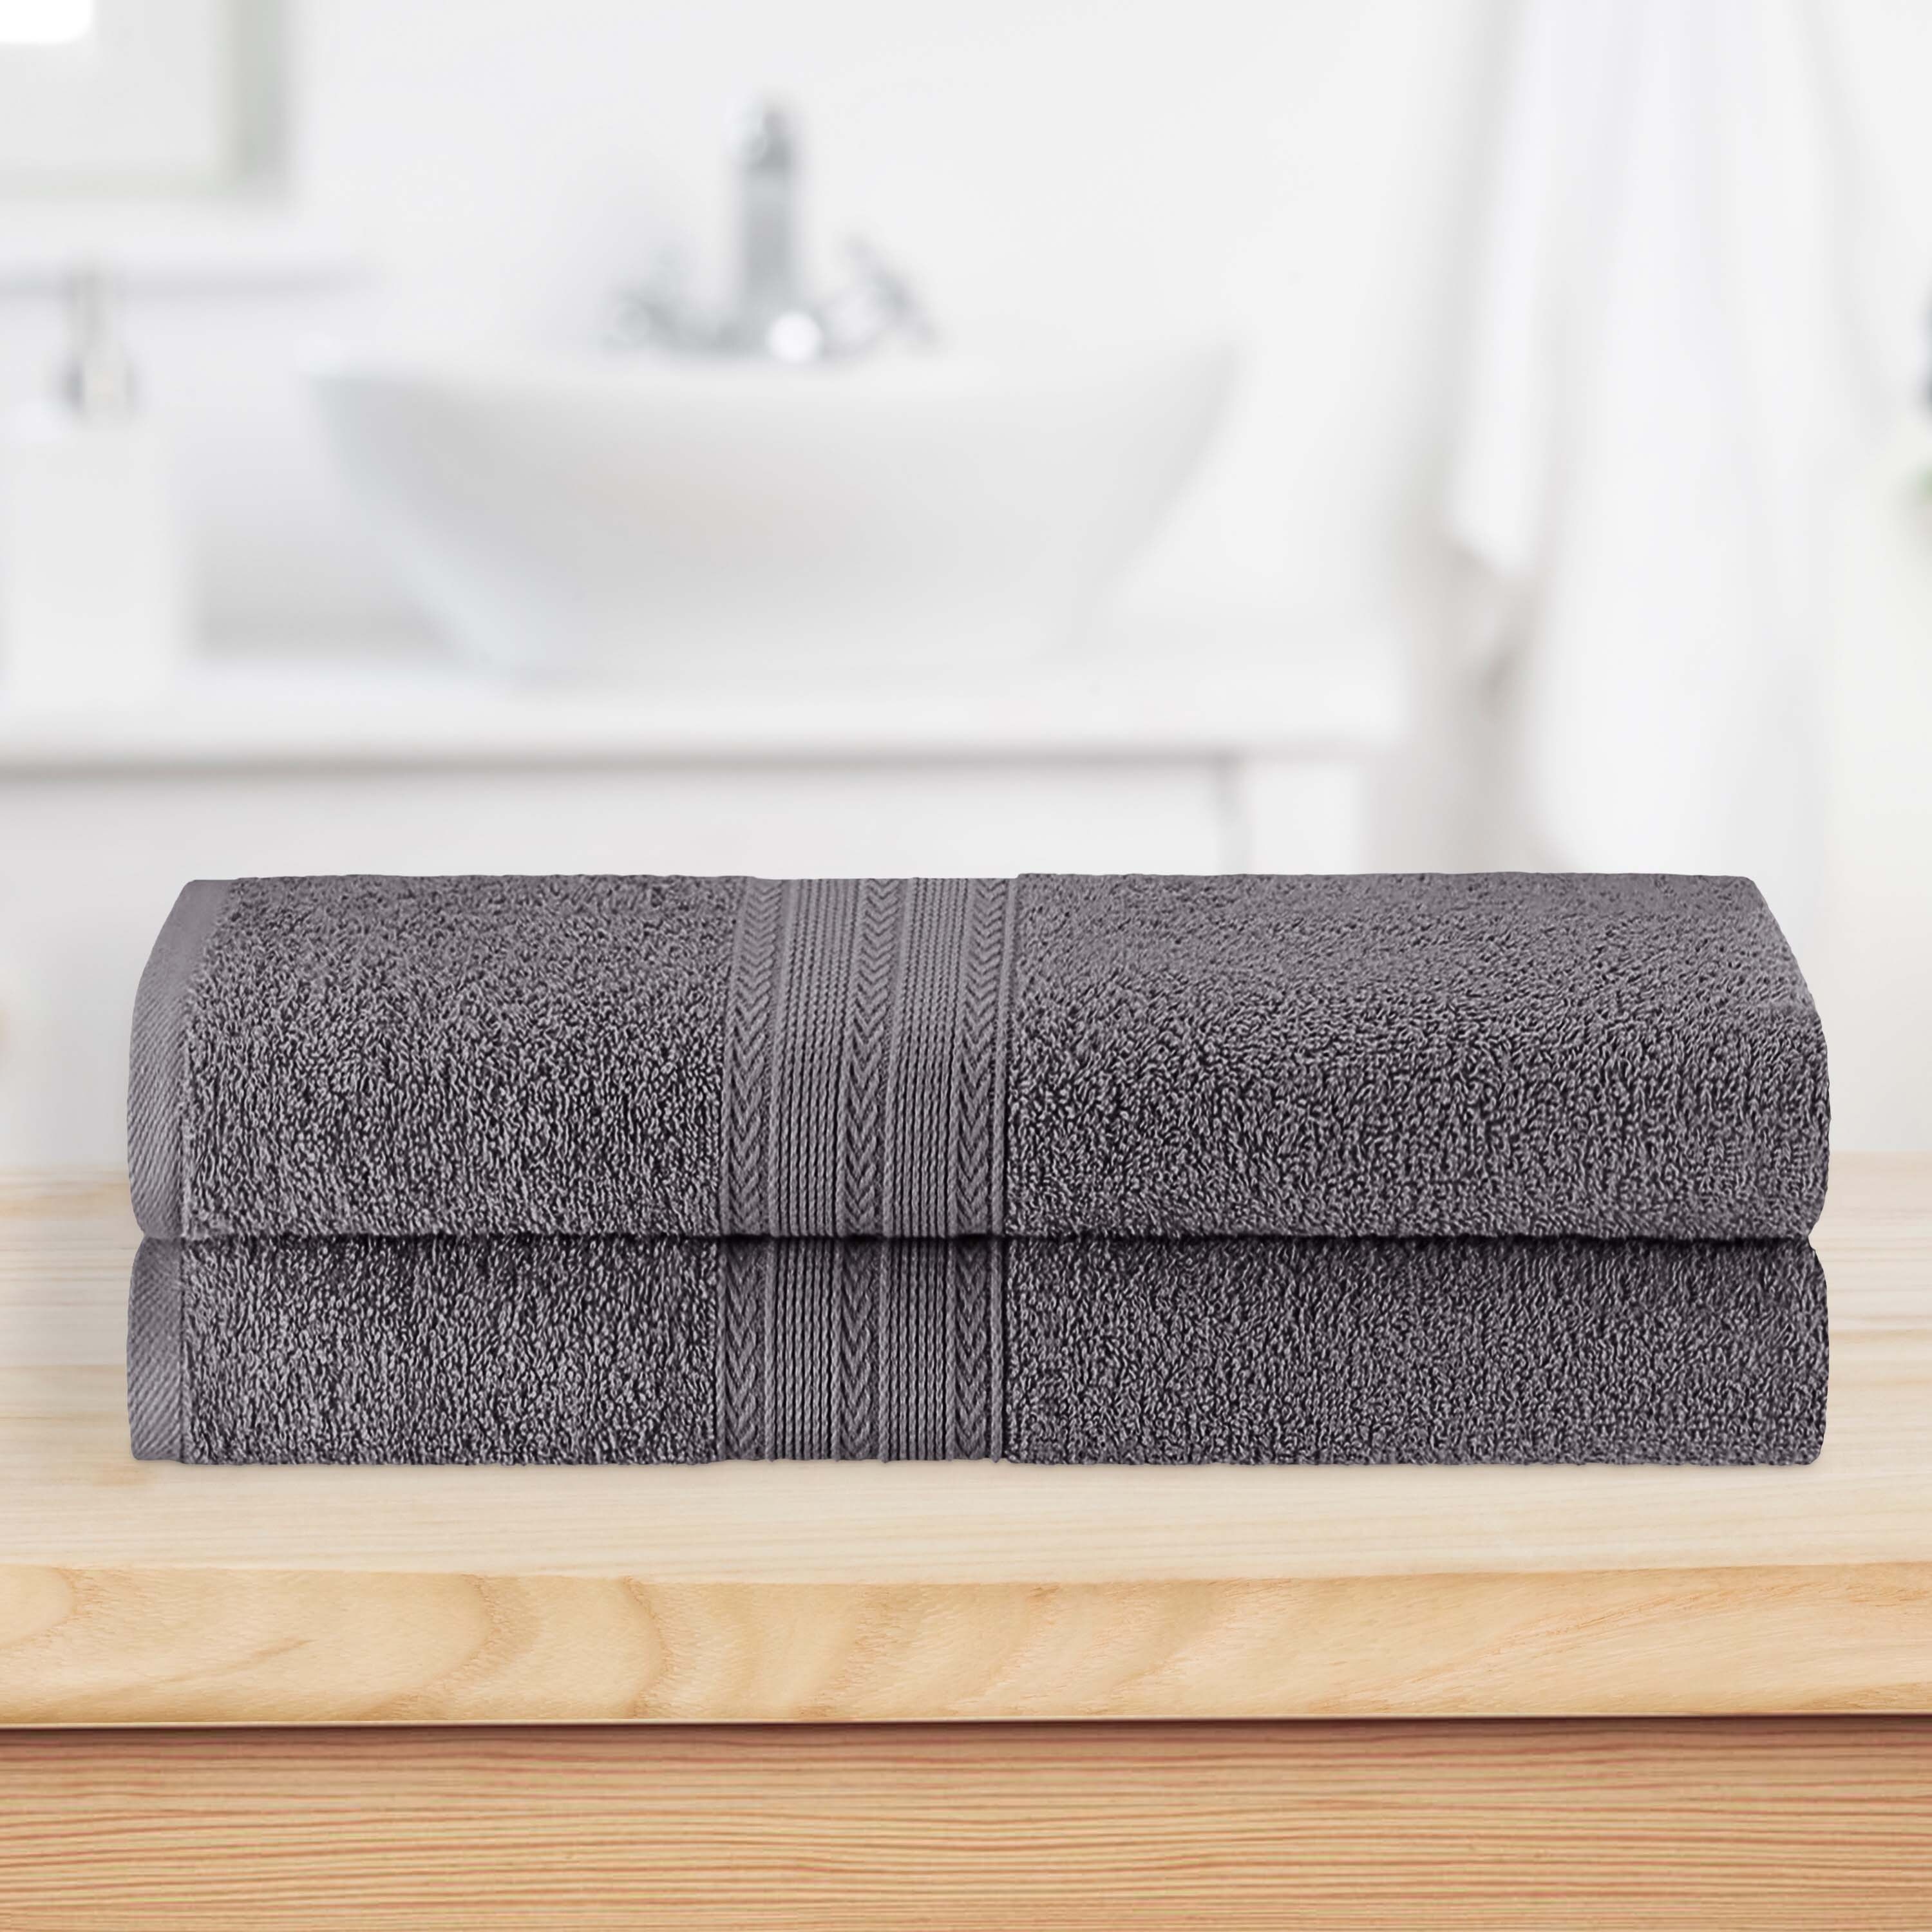 https://ak1.ostkcdn.com/images/products/is/images/direct/a8593fab48cd39c53bab4afa639db7665c44a19c/Eco-Friendly-Sustainable-Cotton-Bath-Sheet-Set-of-2-by-Superior.jpg